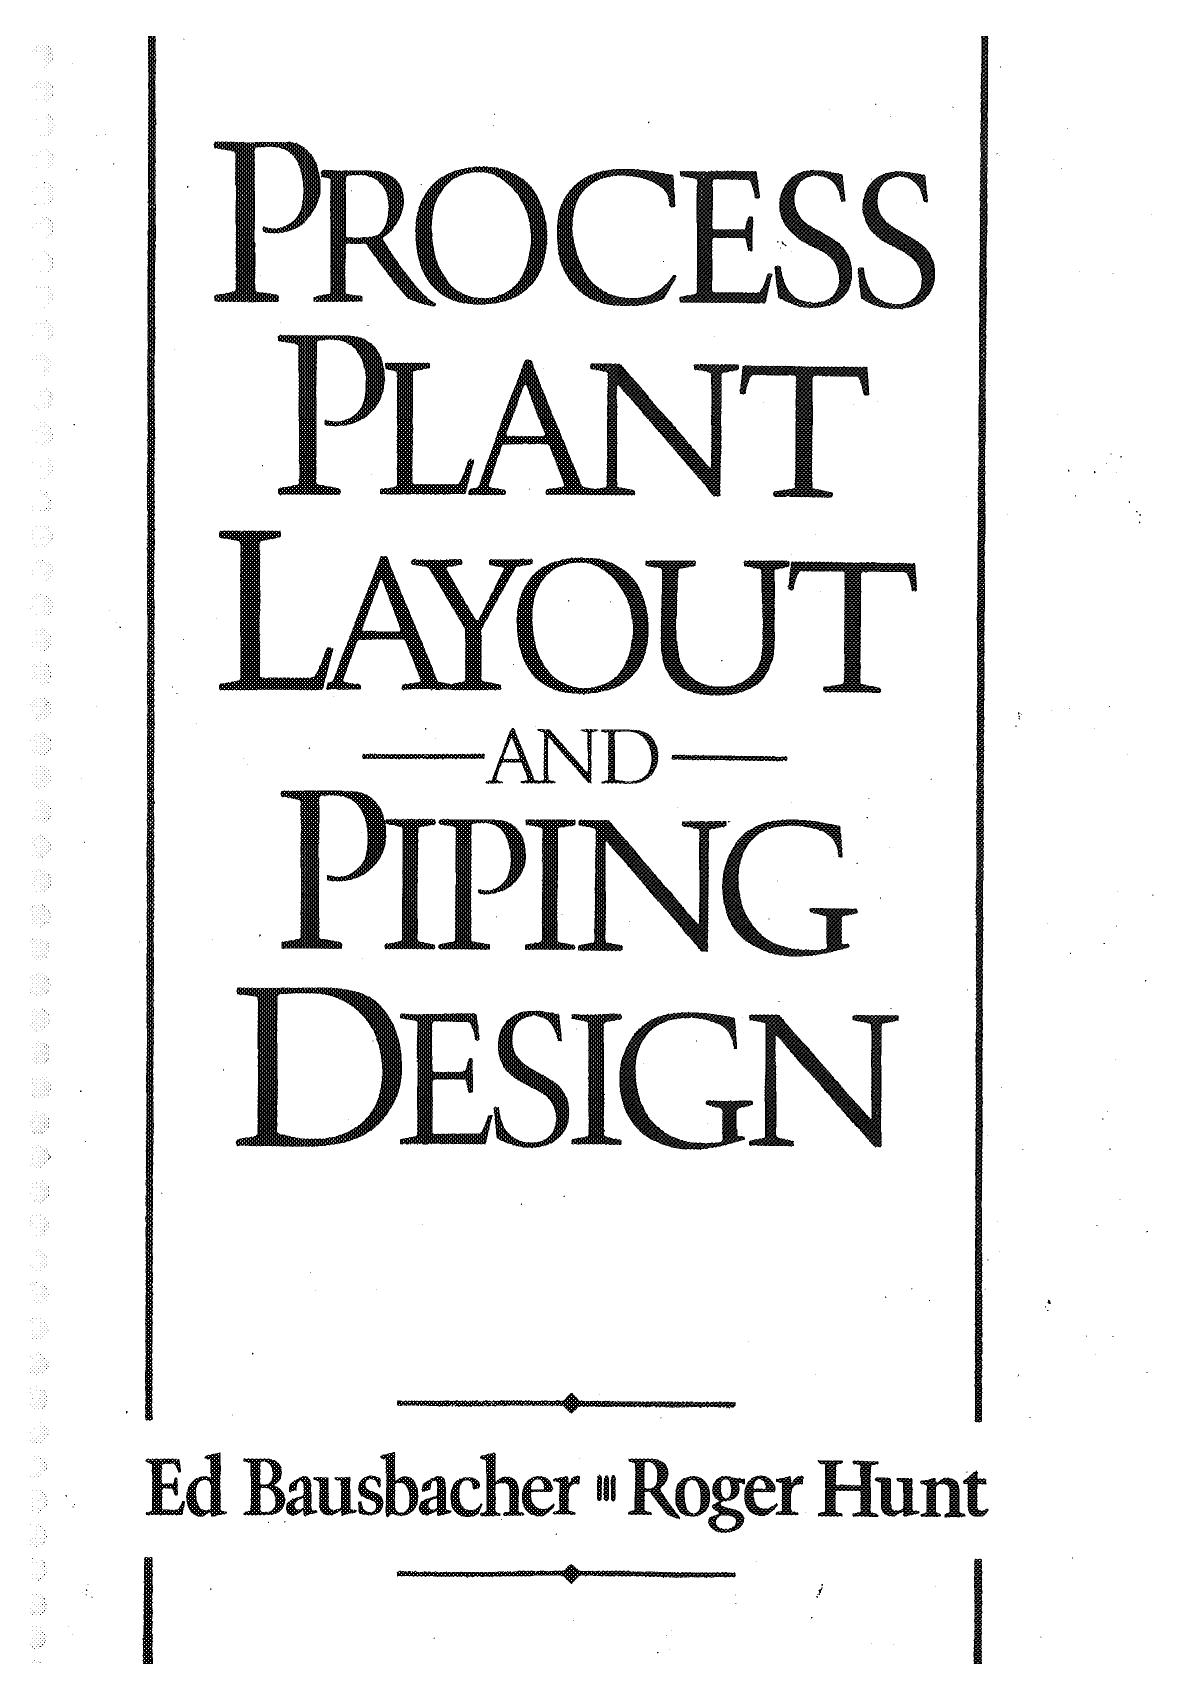 Process-Plant-Layout-and-Piping-Design                                                                                             1993